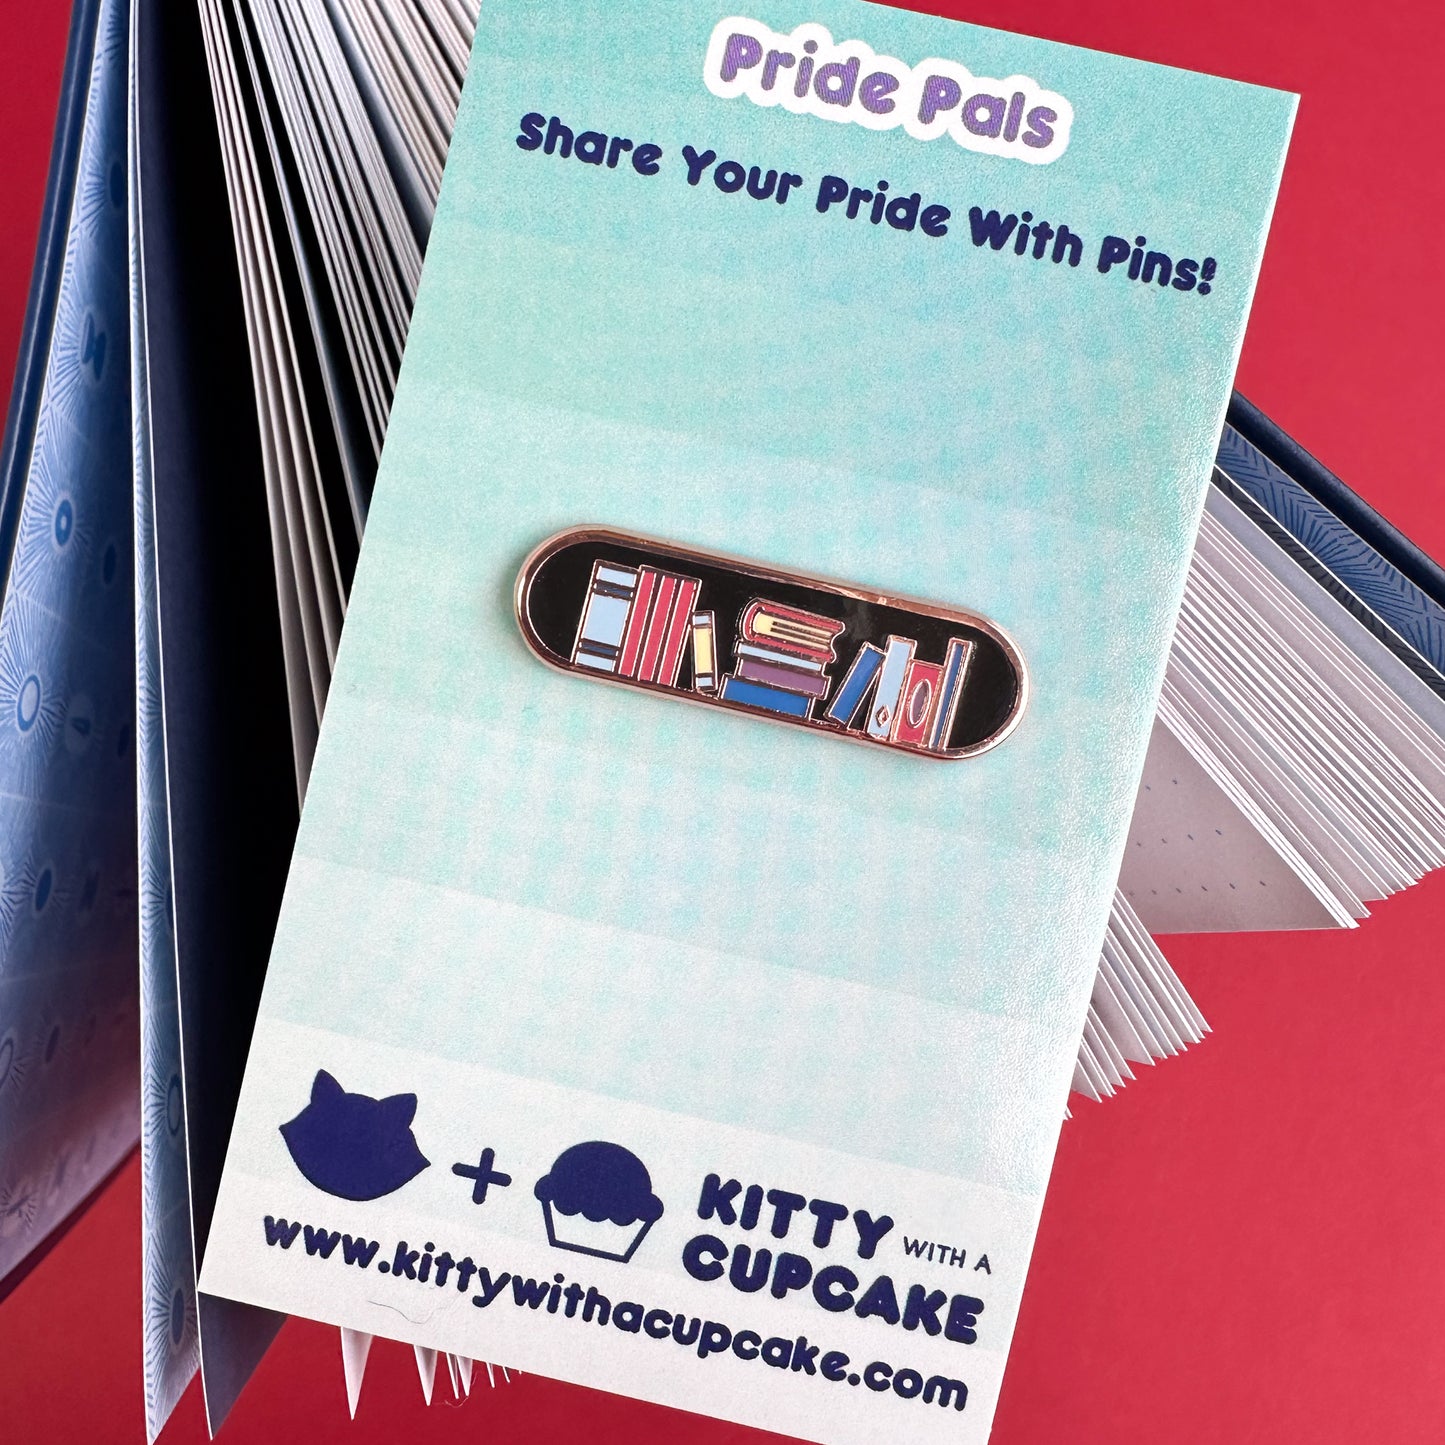 An enamel pin packaged on a card that reads "Pride Pals" the pin has an illustration of a bookshelf on it. 